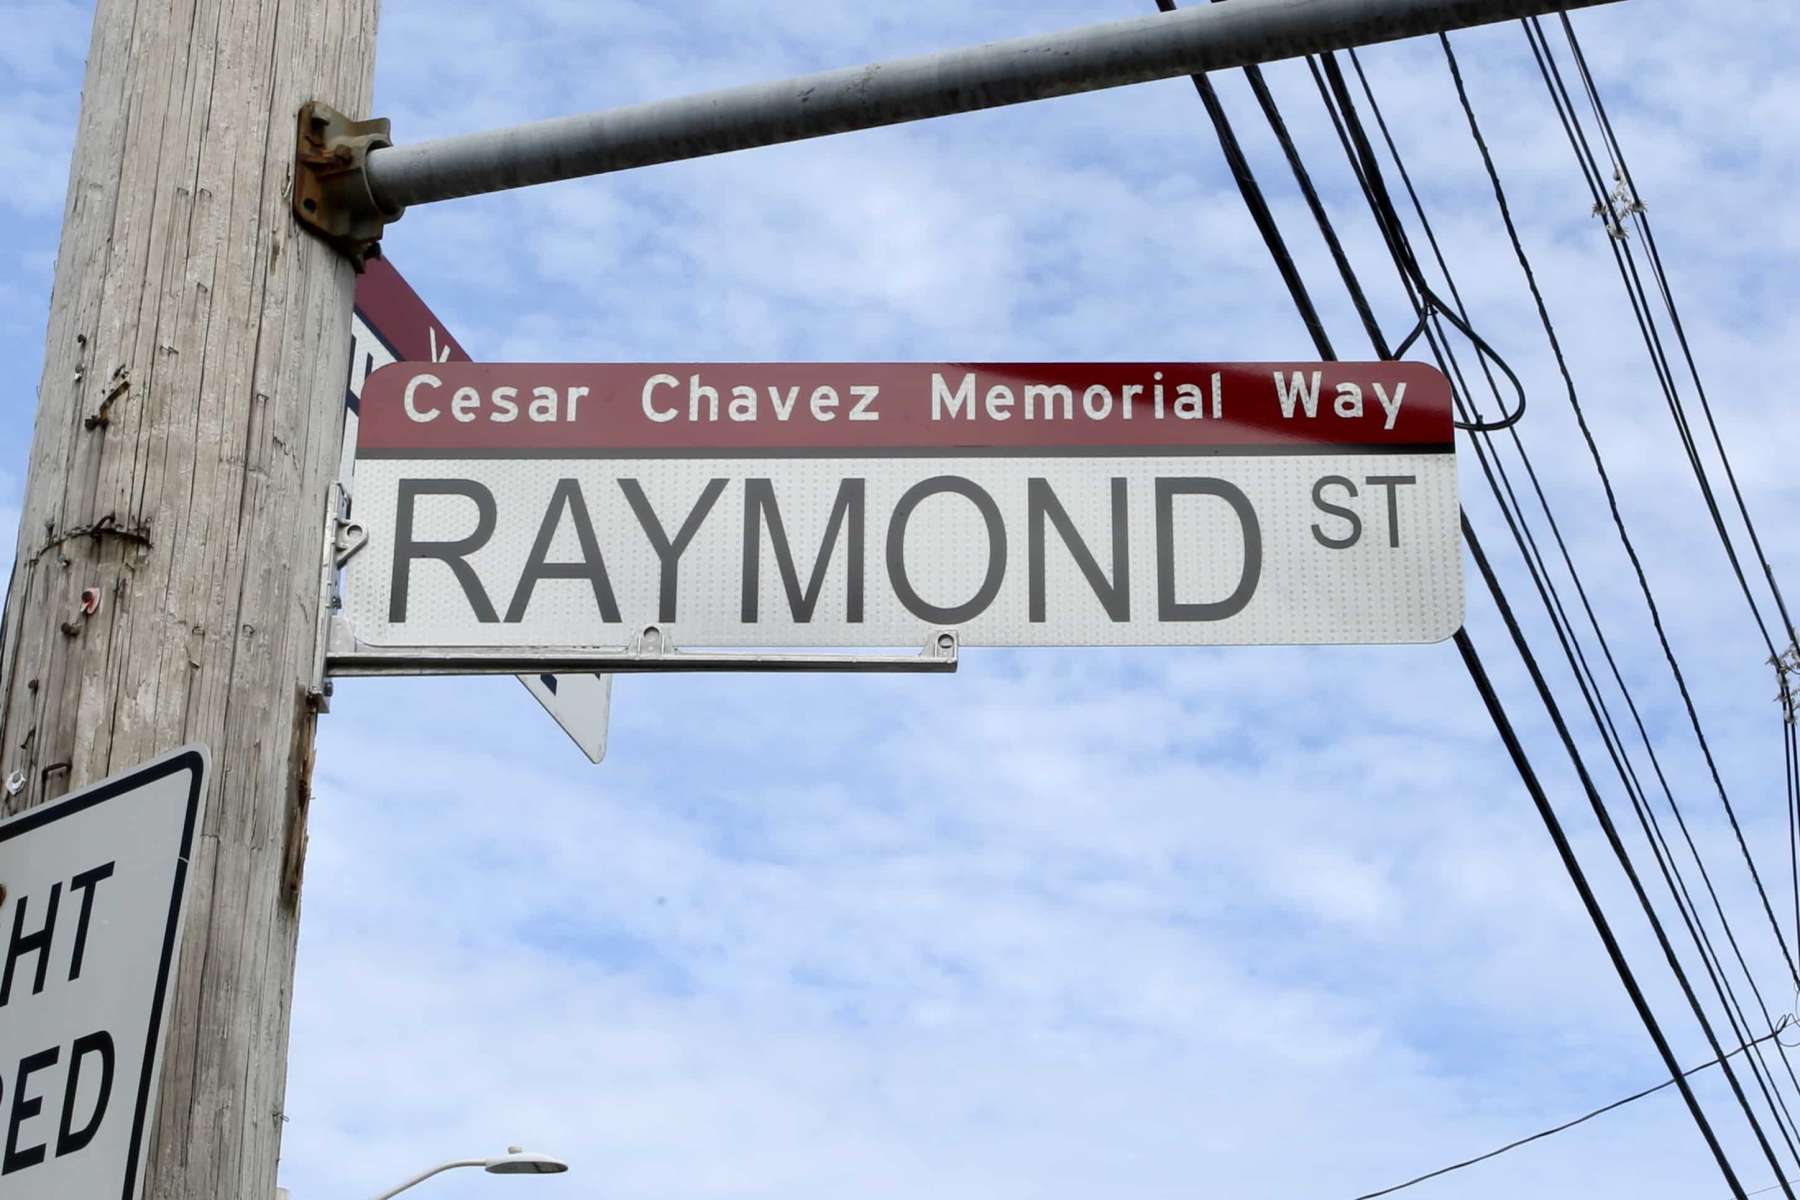 Providence dedicates Cesar Chavez Memorial Way to late civil rights and labor leader